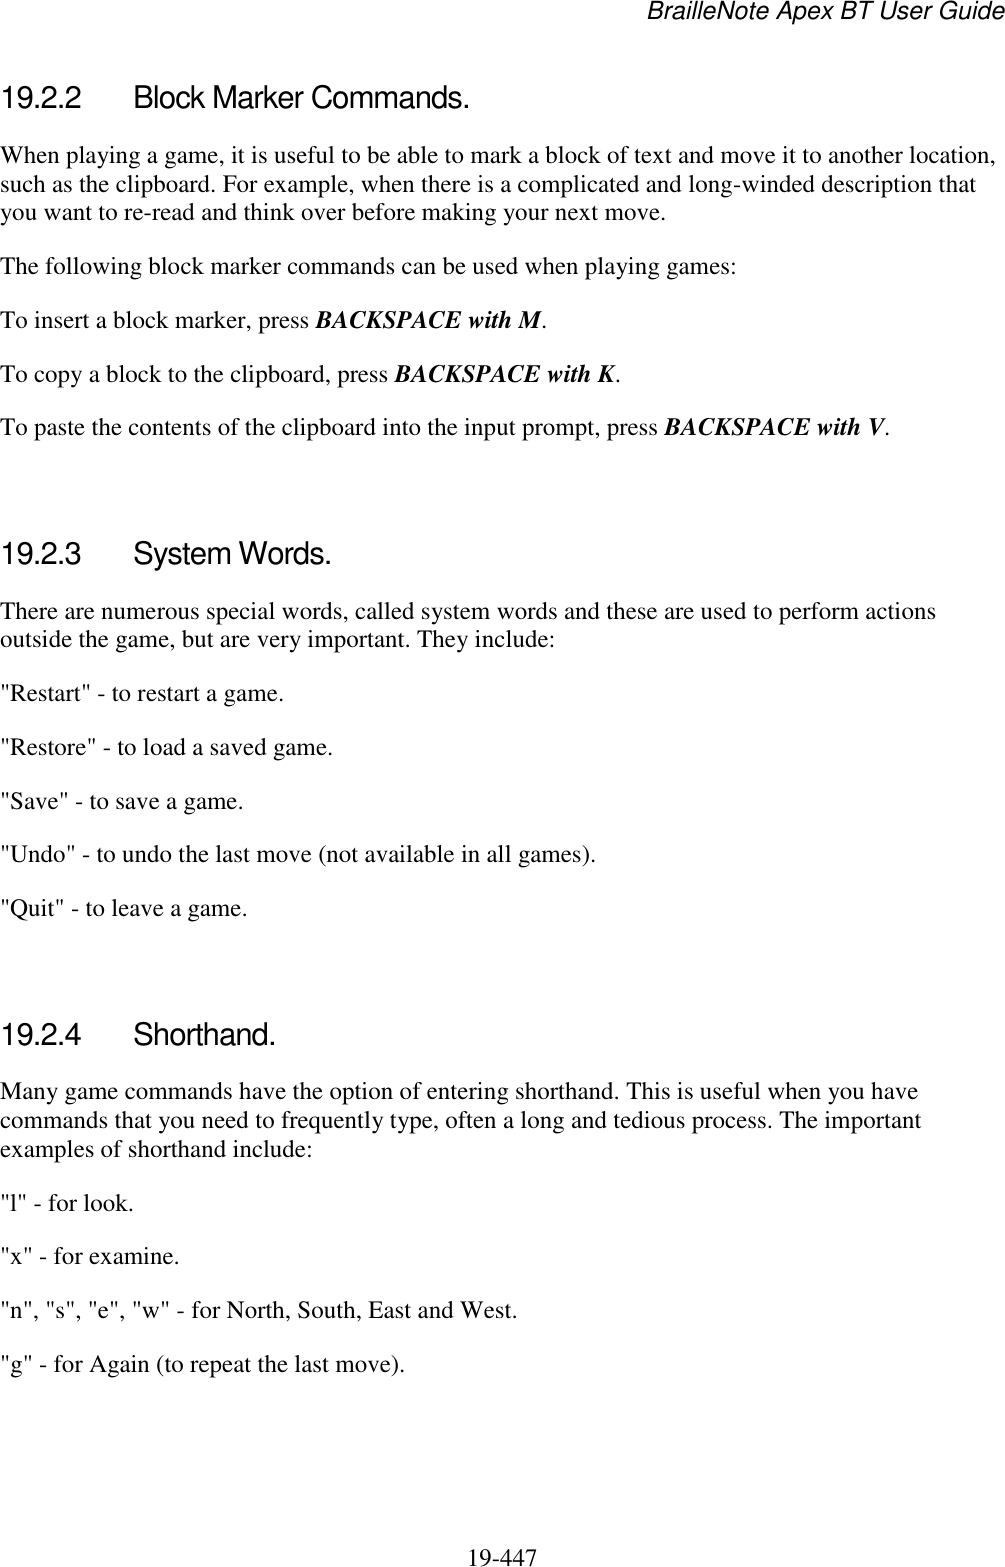 BrailleNote Apex BT User Guide   19-447   19.2.2  Block Marker Commands. When playing a game, it is useful to be able to mark a block of text and move it to another location, such as the clipboard. For example, when there is a complicated and long-winded description that you want to re-read and think over before making your next move. The following block marker commands can be used when playing games: To insert a block marker, press BACKSPACE with M. To copy a block to the clipboard, press BACKSPACE with K. To paste the contents of the clipboard into the input prompt, press BACKSPACE with V.   19.2.3  System Words. There are numerous special words, called system words and these are used to perform actions outside the game, but are very important. They include: &quot;Restart&quot; - to restart a game. &quot;Restore&quot; - to load a saved game. &quot;Save&quot; - to save a game. &quot;Undo&quot; - to undo the last move (not available in all games). &quot;Quit&quot; - to leave a game.   19.2.4  Shorthand. Many game commands have the option of entering shorthand. This is useful when you have commands that you need to frequently type, often a long and tedious process. The important examples of shorthand include: &quot;l&quot; - for look. &quot;x&quot; - for examine. &quot;n&quot;, &quot;s&quot;, &quot;e&quot;, &quot;w&quot; - for North, South, East and West. &quot;g&quot; - for Again (to repeat the last move).  